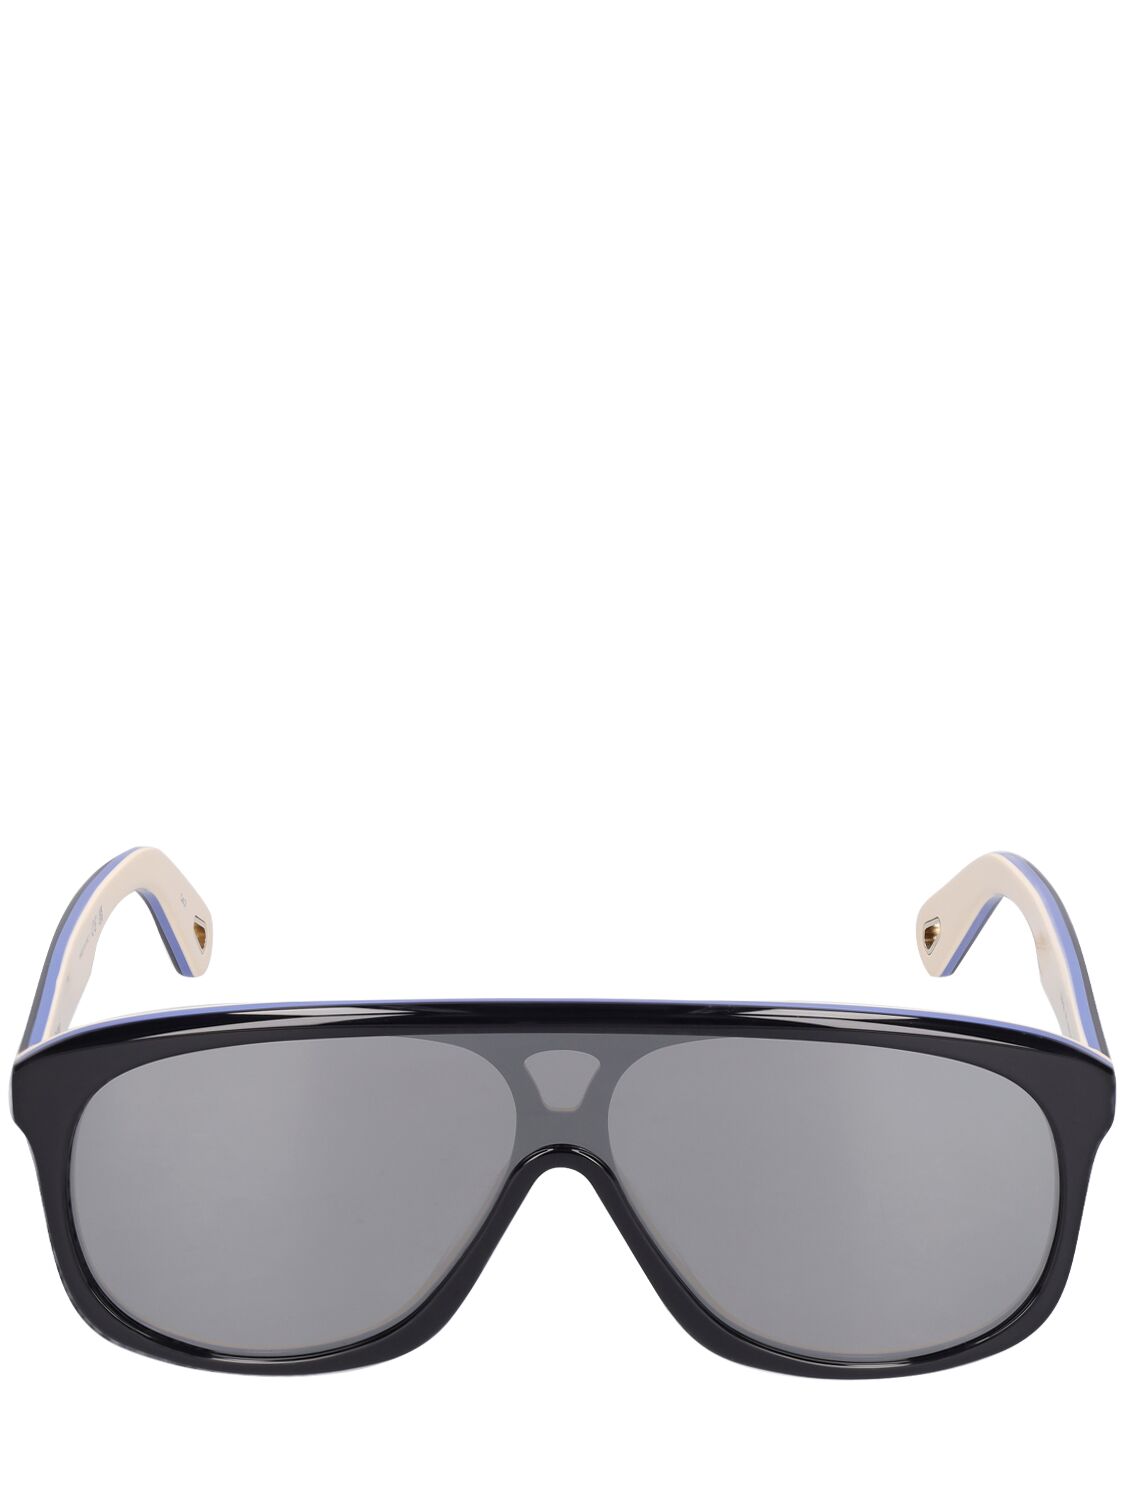 Chloé Mountaineering After Ski Sunglasses In Black,grey